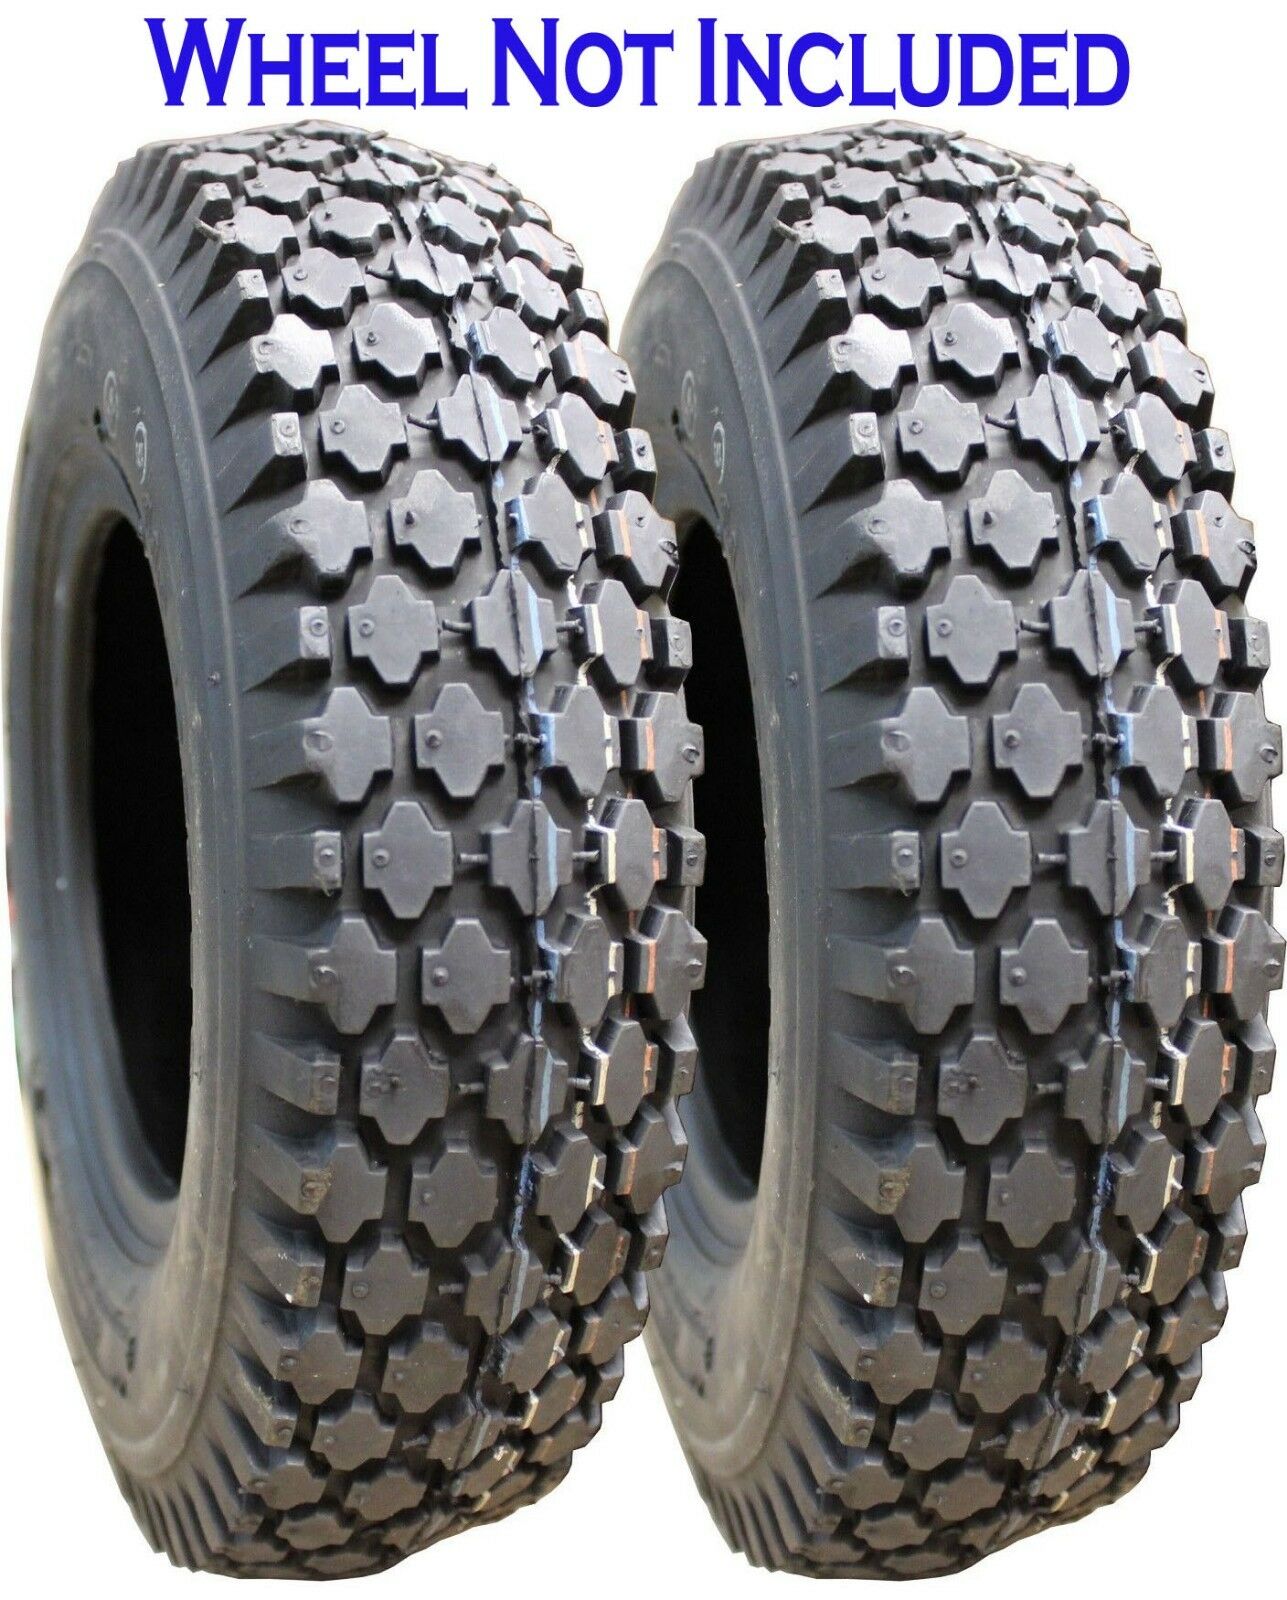 Greenball Stud S356 Transmaster Utility Tire 4ply 4.80/4.00-8 Pack of